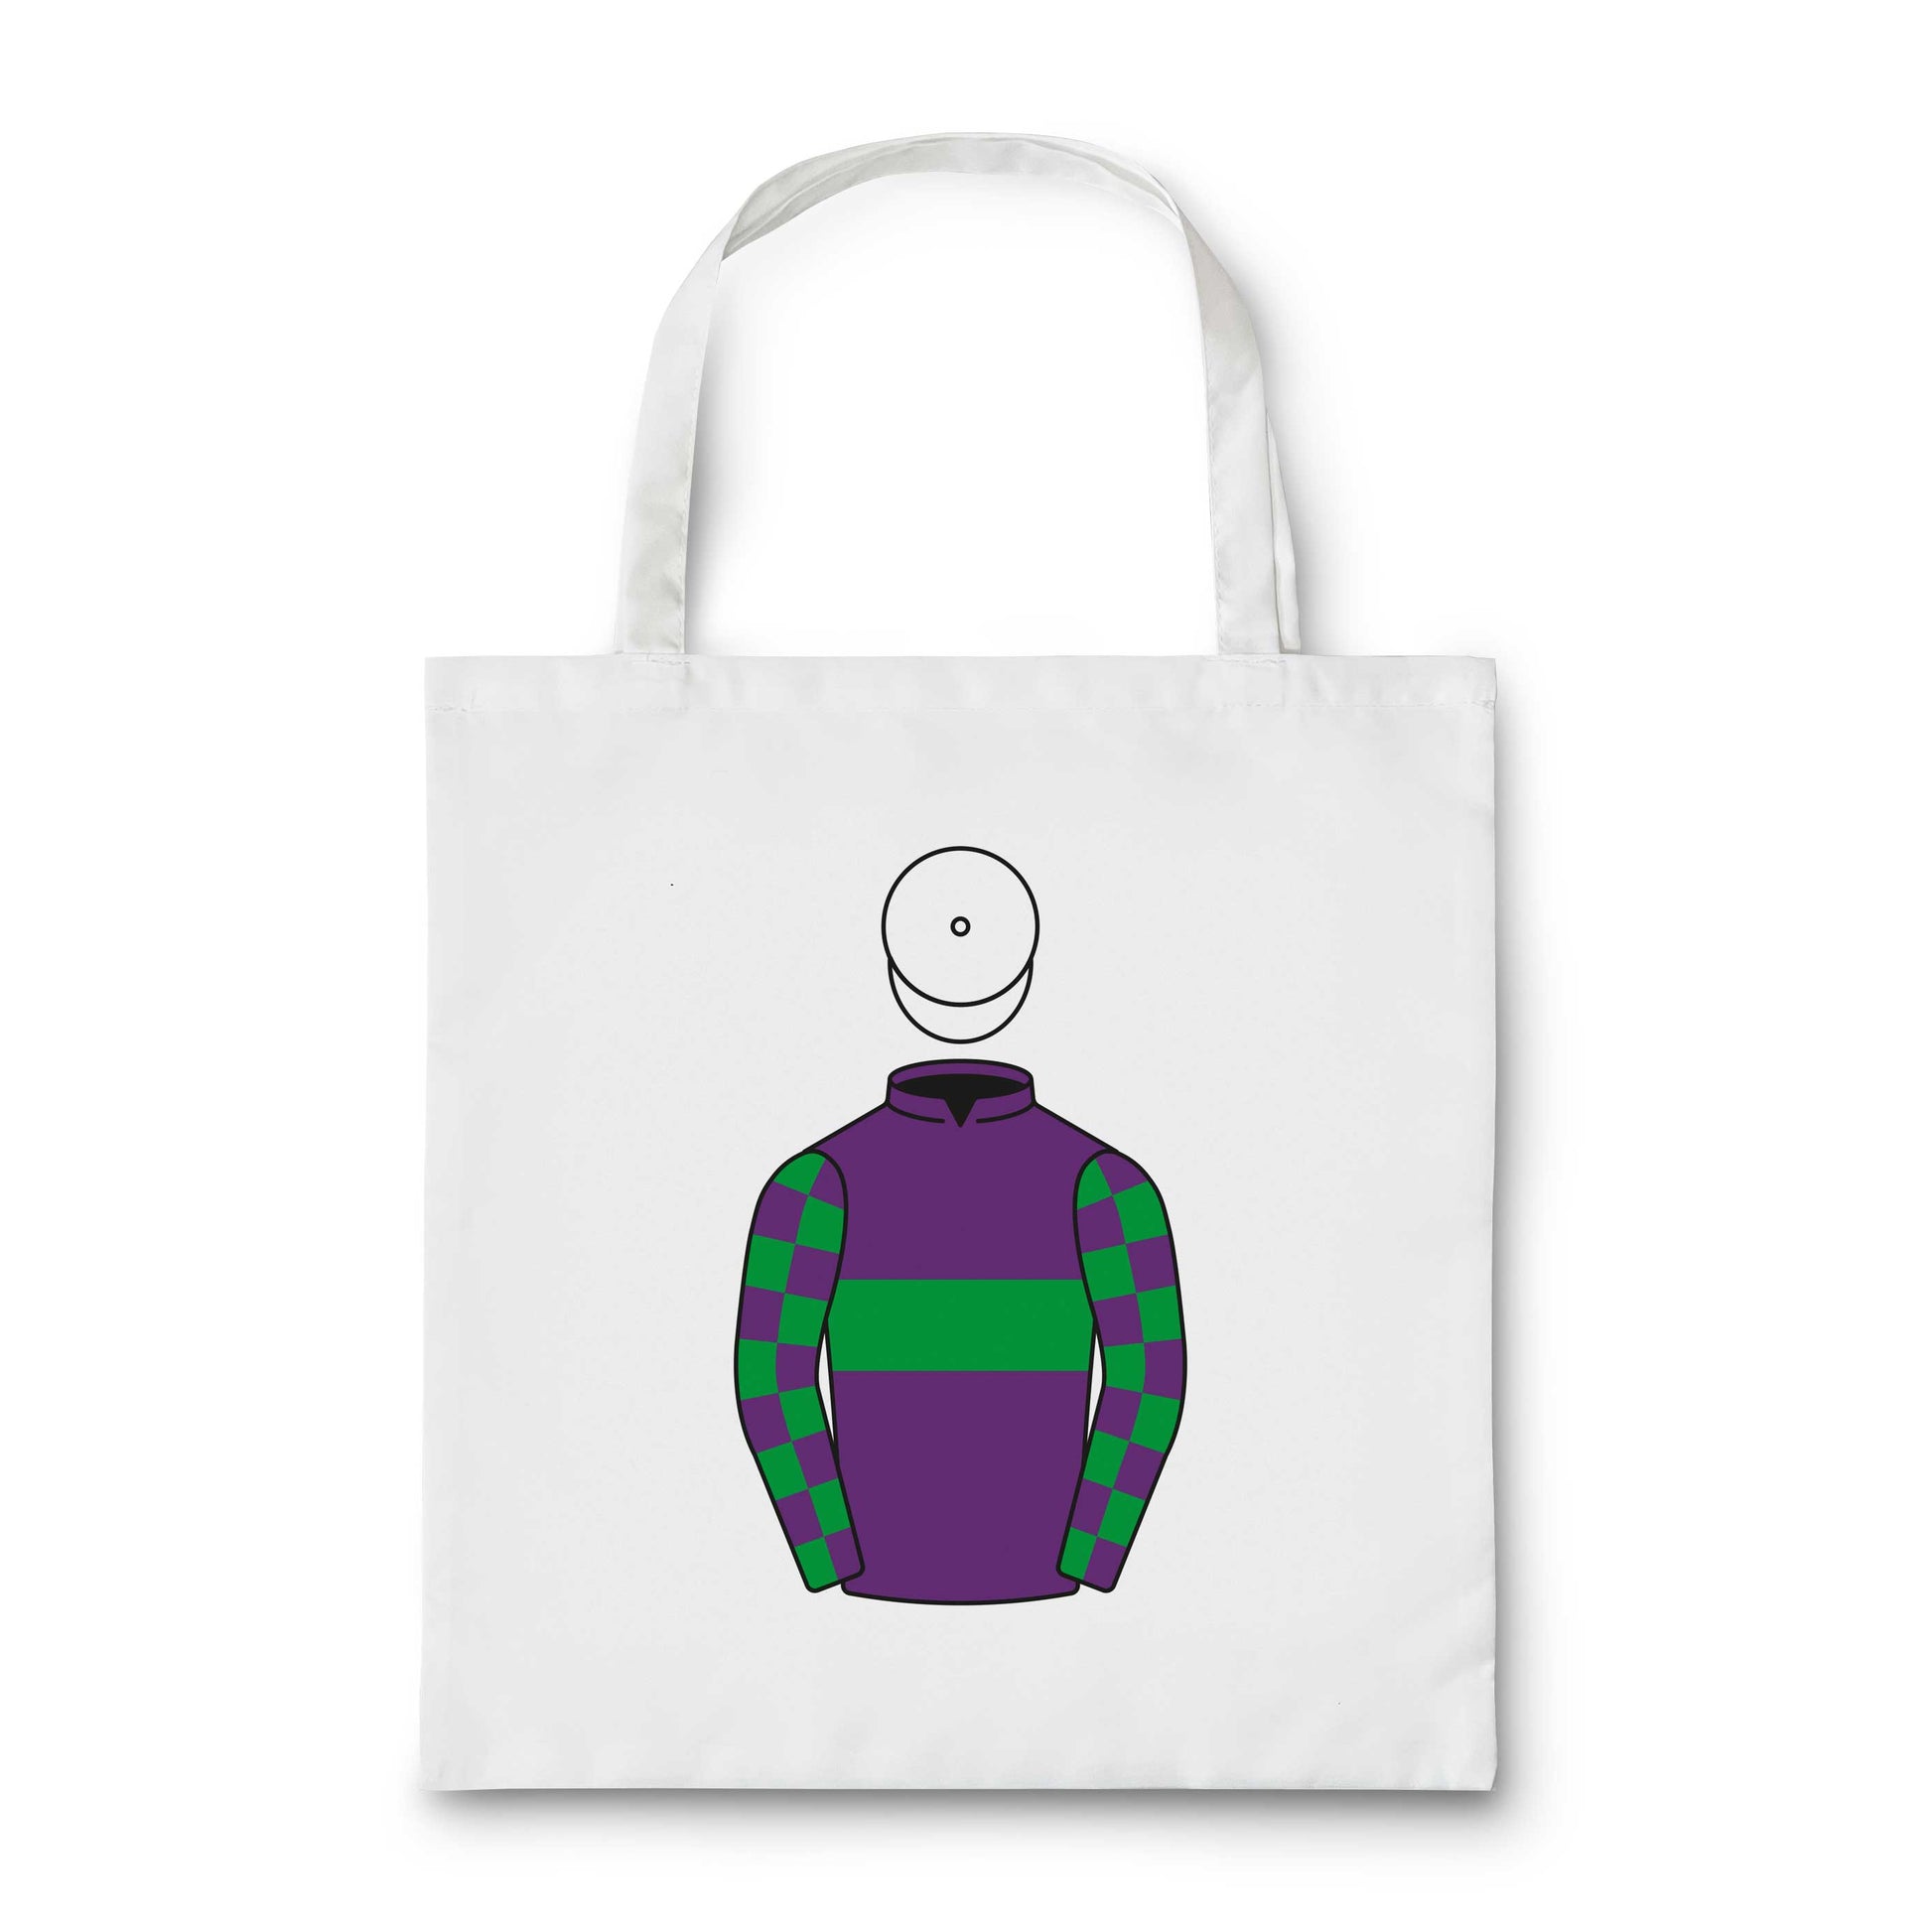 The Englands and Heywoods Tote Bag - Tote Bag - Hacked Up